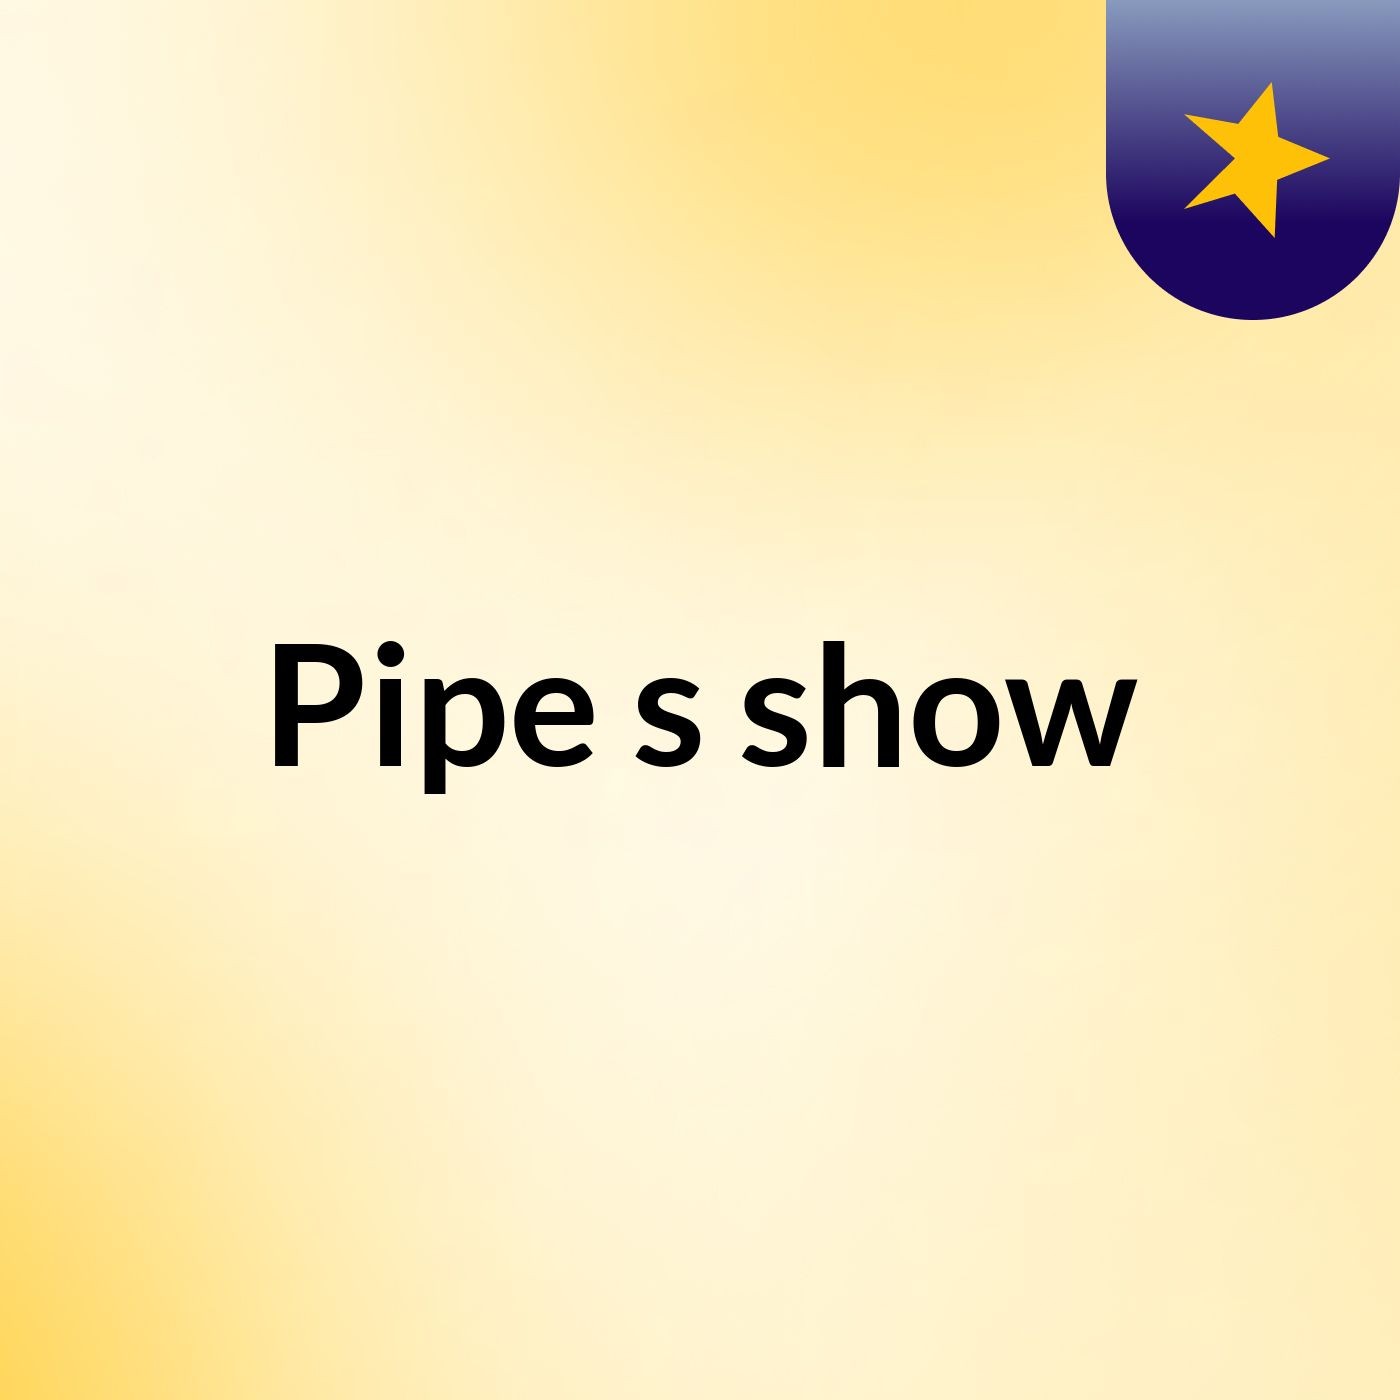 Pipe's show